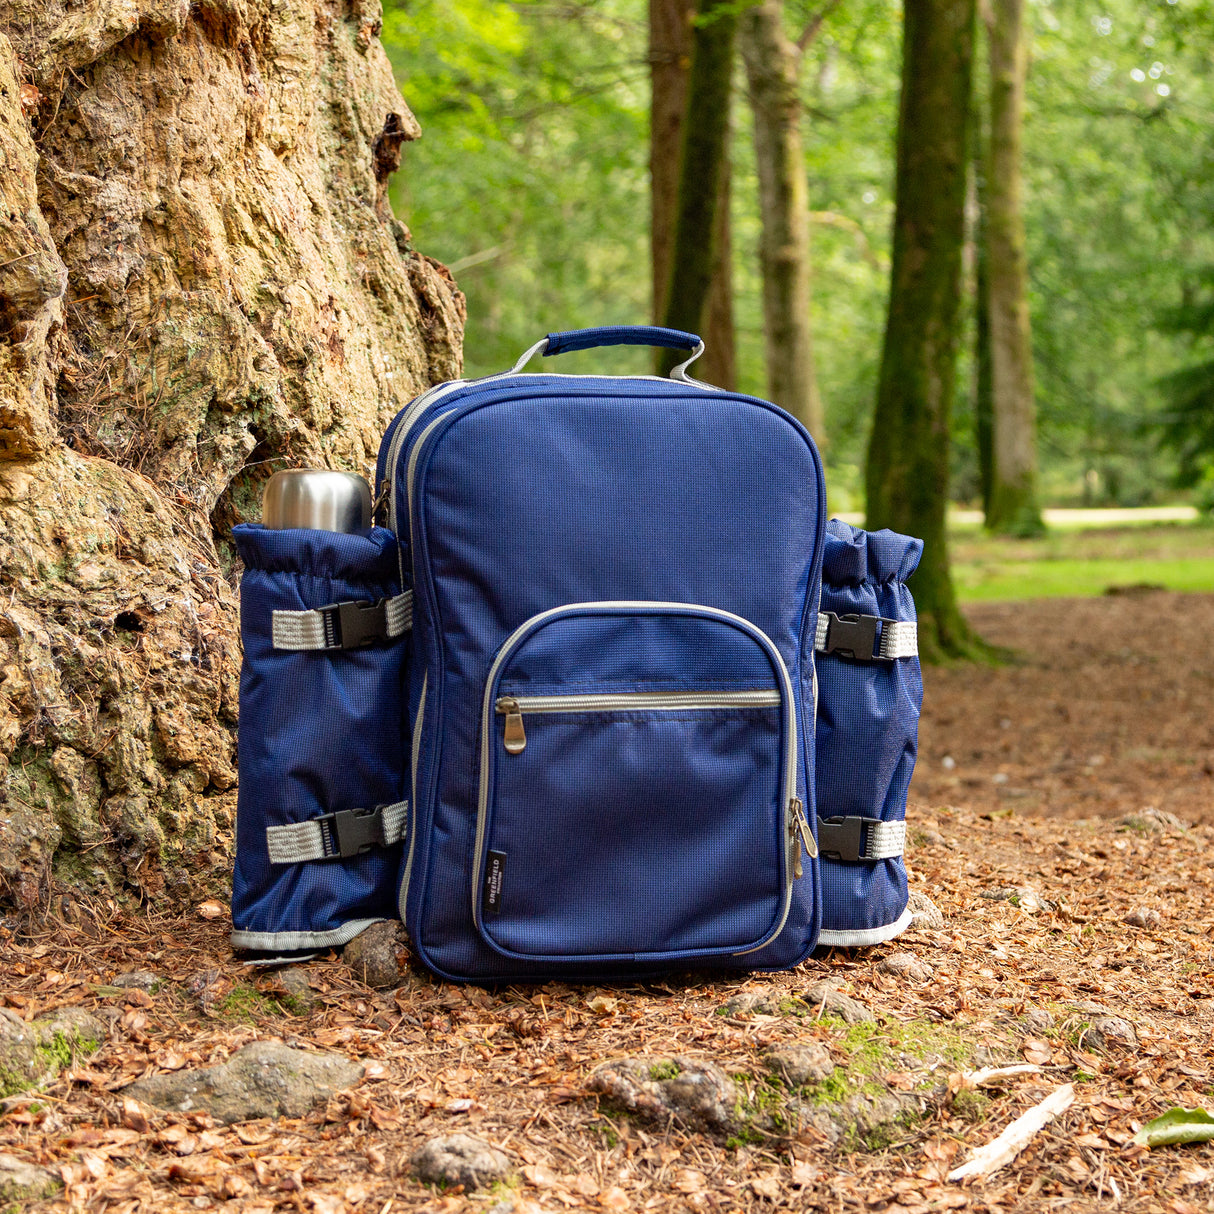 Luxury Picnic Backpack for 4 people in Navy Blue